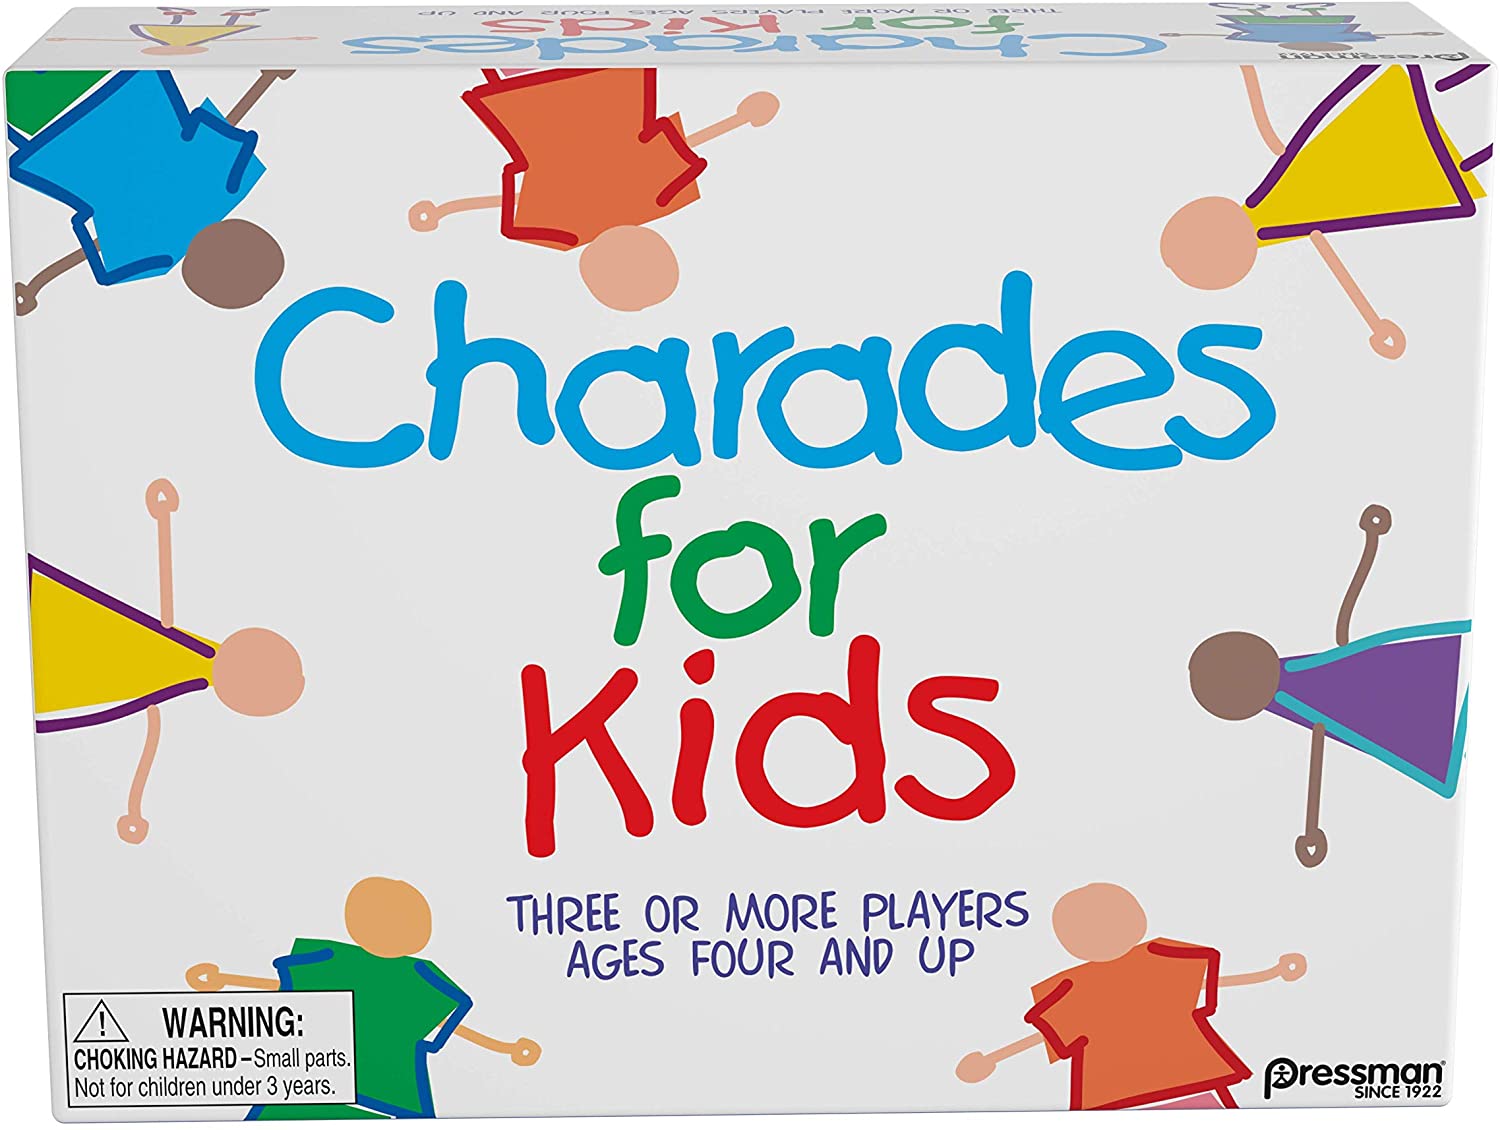 Pressman Charades For Kids, Family Board Game